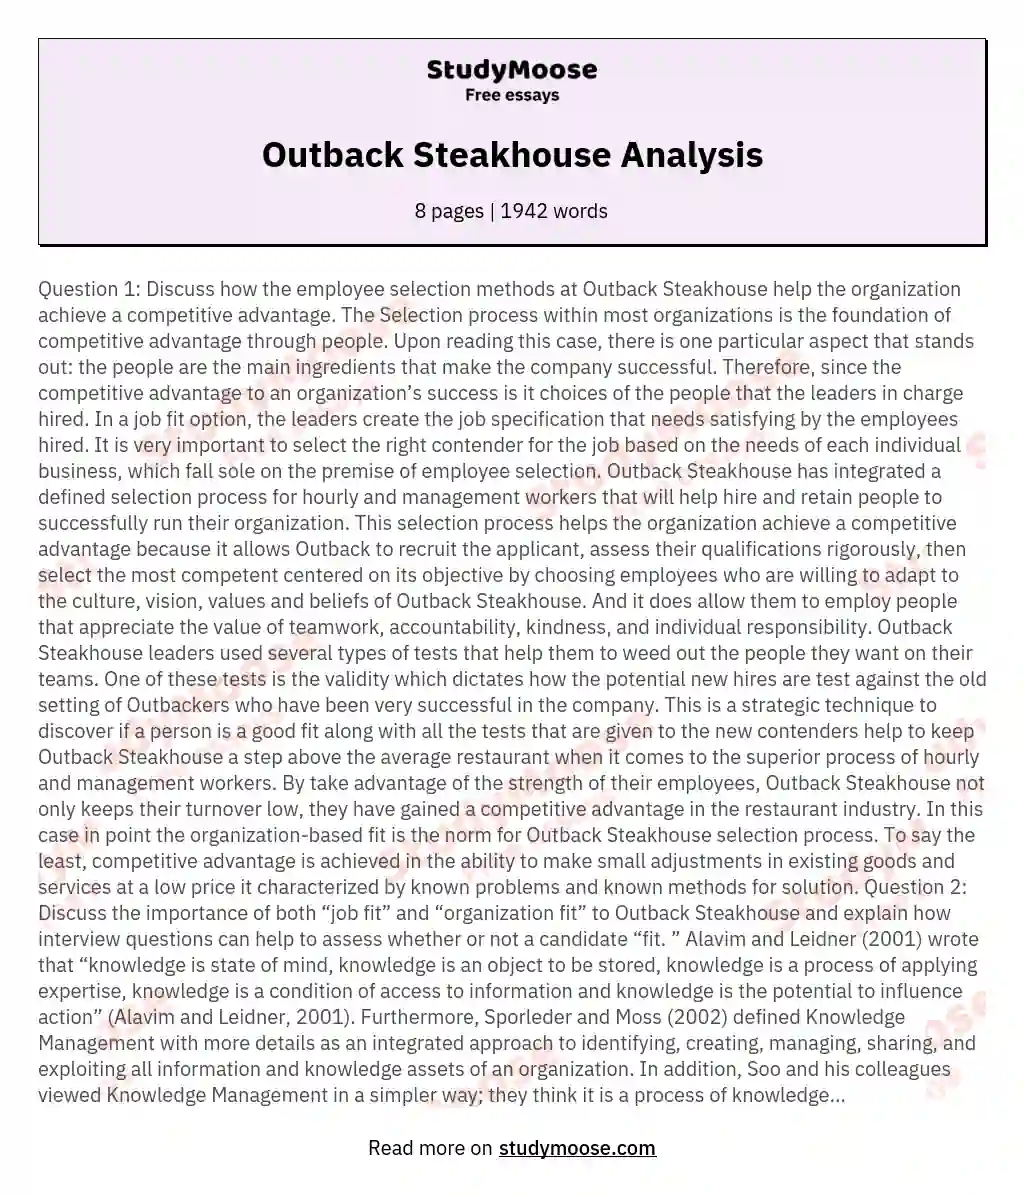 Outback Steakhouse Analysis essay